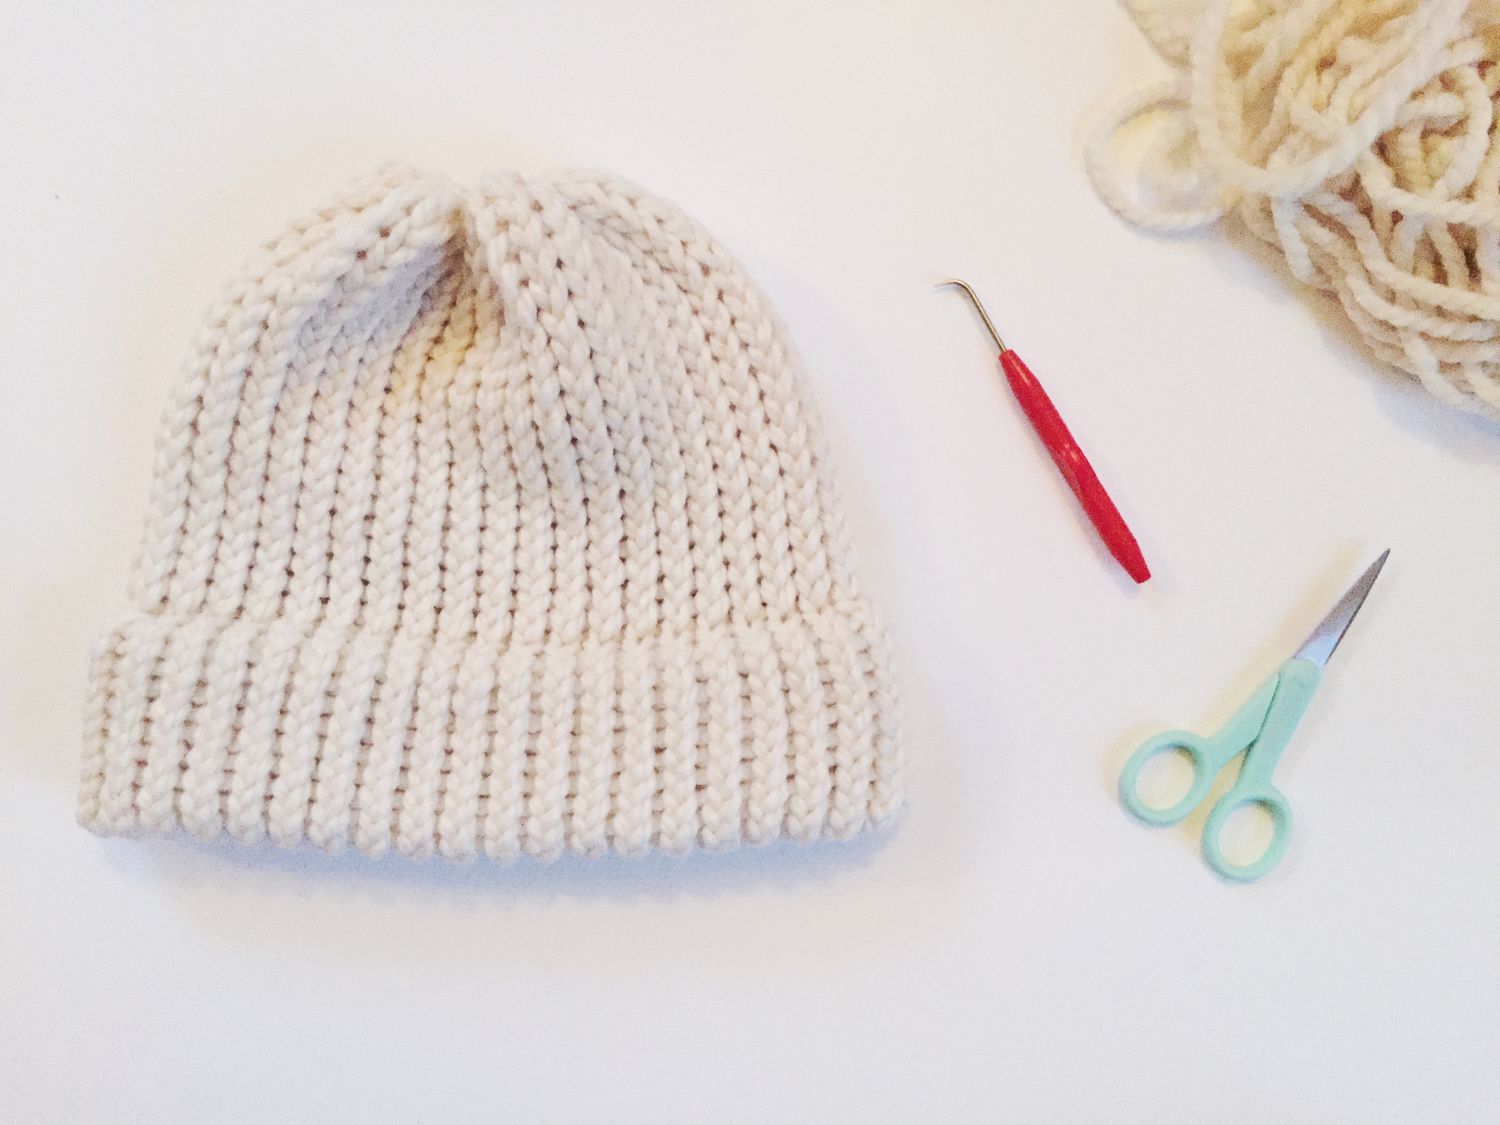 How to Loom Knit a Beanie